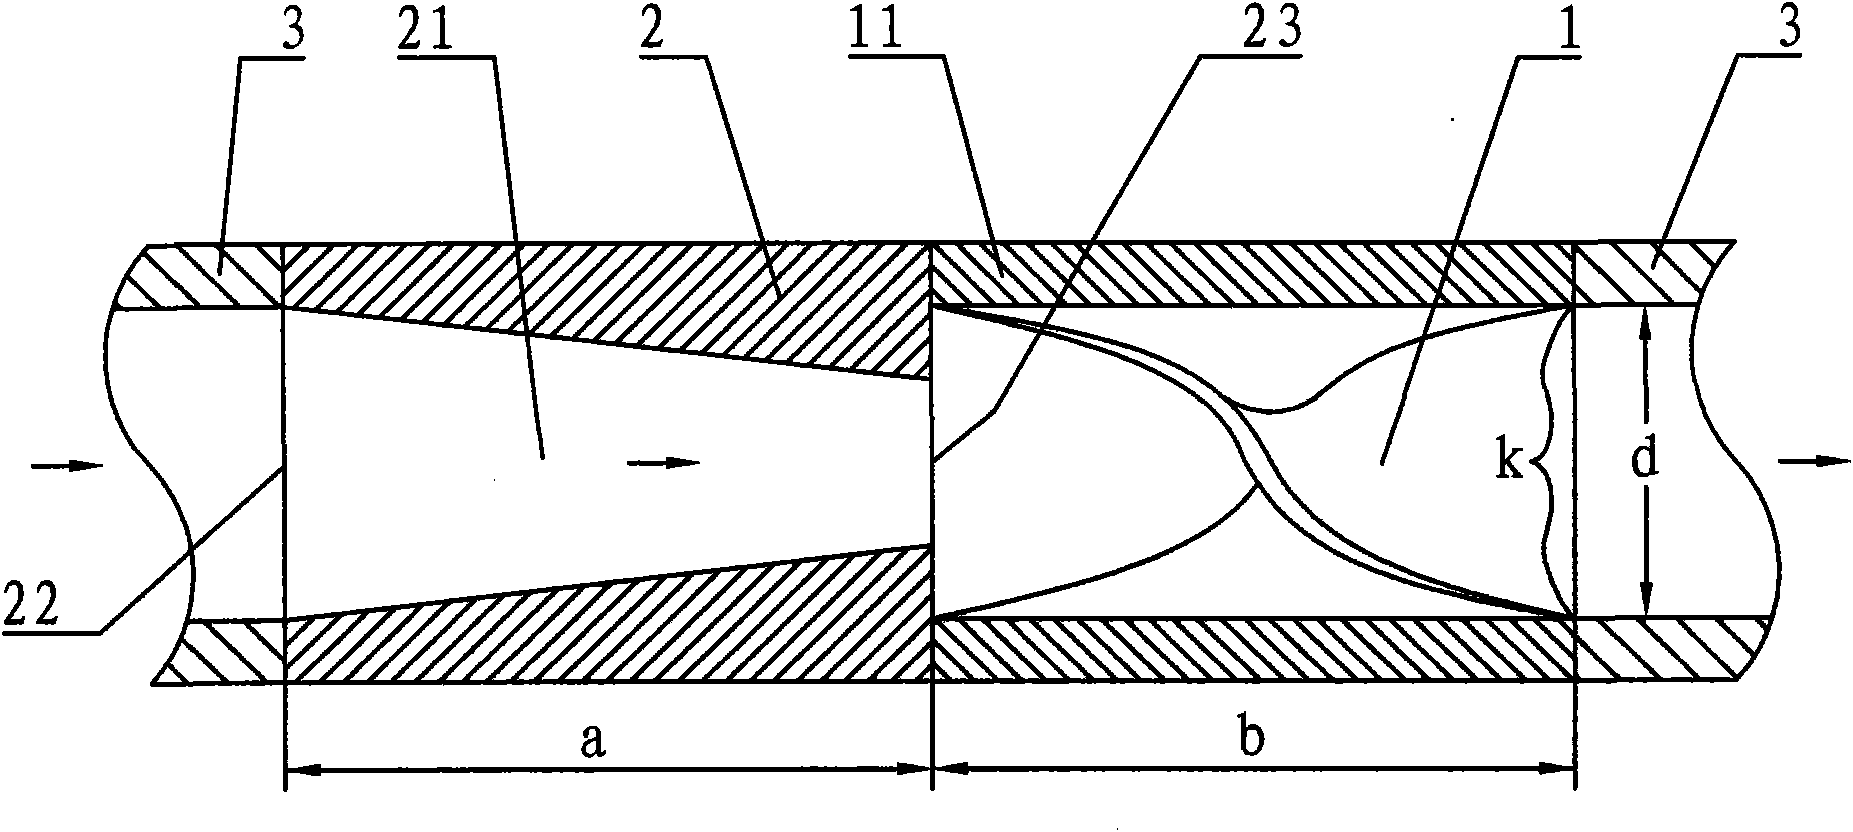 Reinforced heat transfer pipe with spinning disks